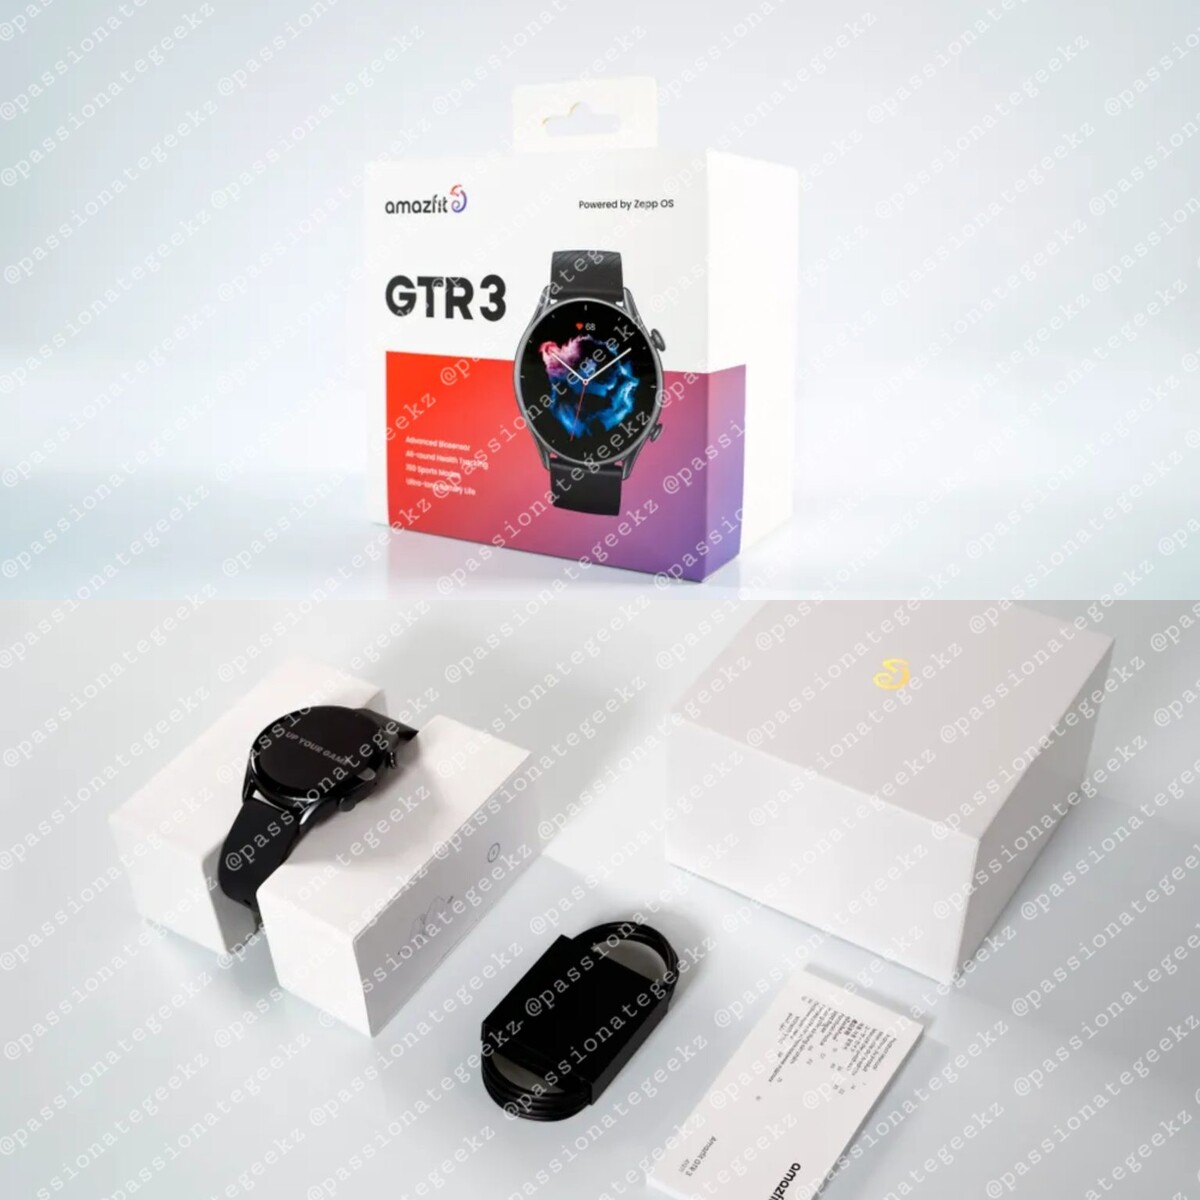 Amazfit launches GTR 3, GTR 3 Pro, and GTS 3 smartwatches in India with  BioTracker PPD 3.0 sensors, 12-day battery life, and 150+ workout modes  starting from ₹13,999 (US$187) -  News